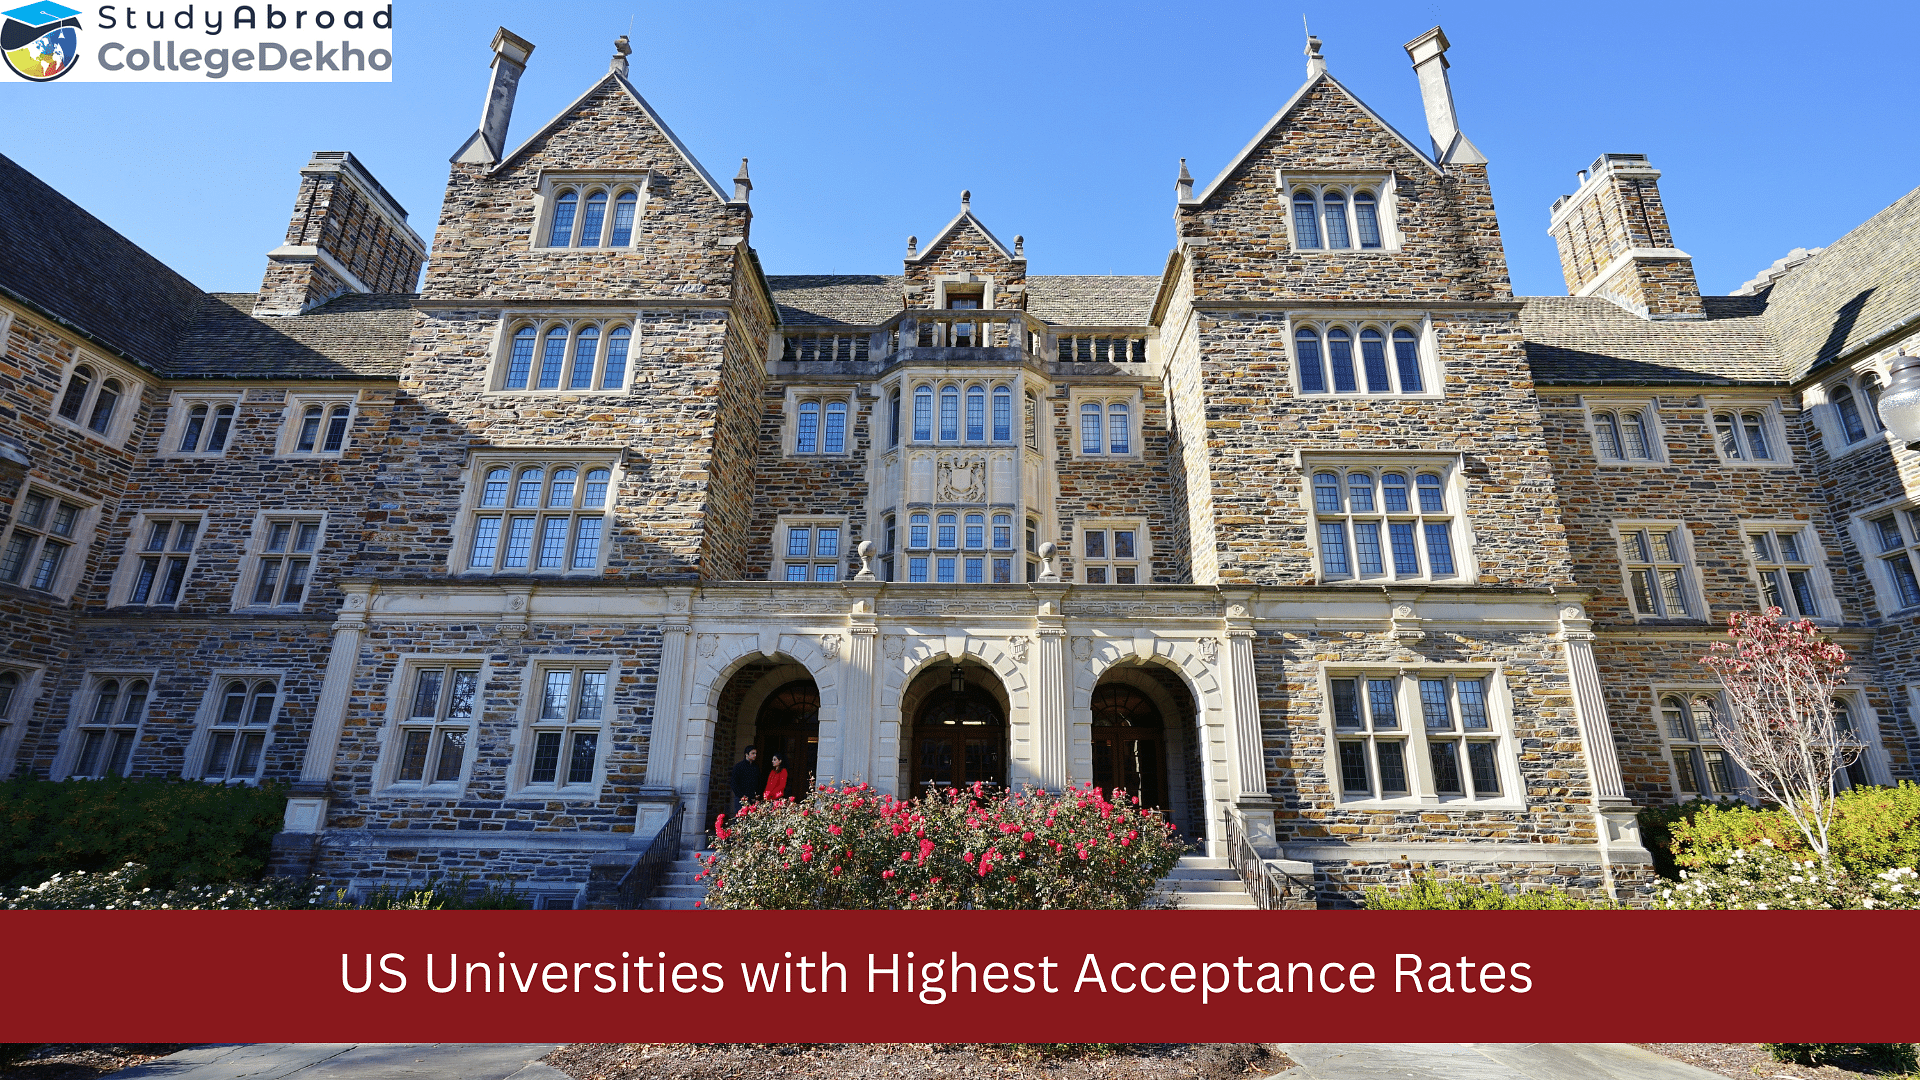 USA Universities With the Highest Acceptance Rates for Int'l Students